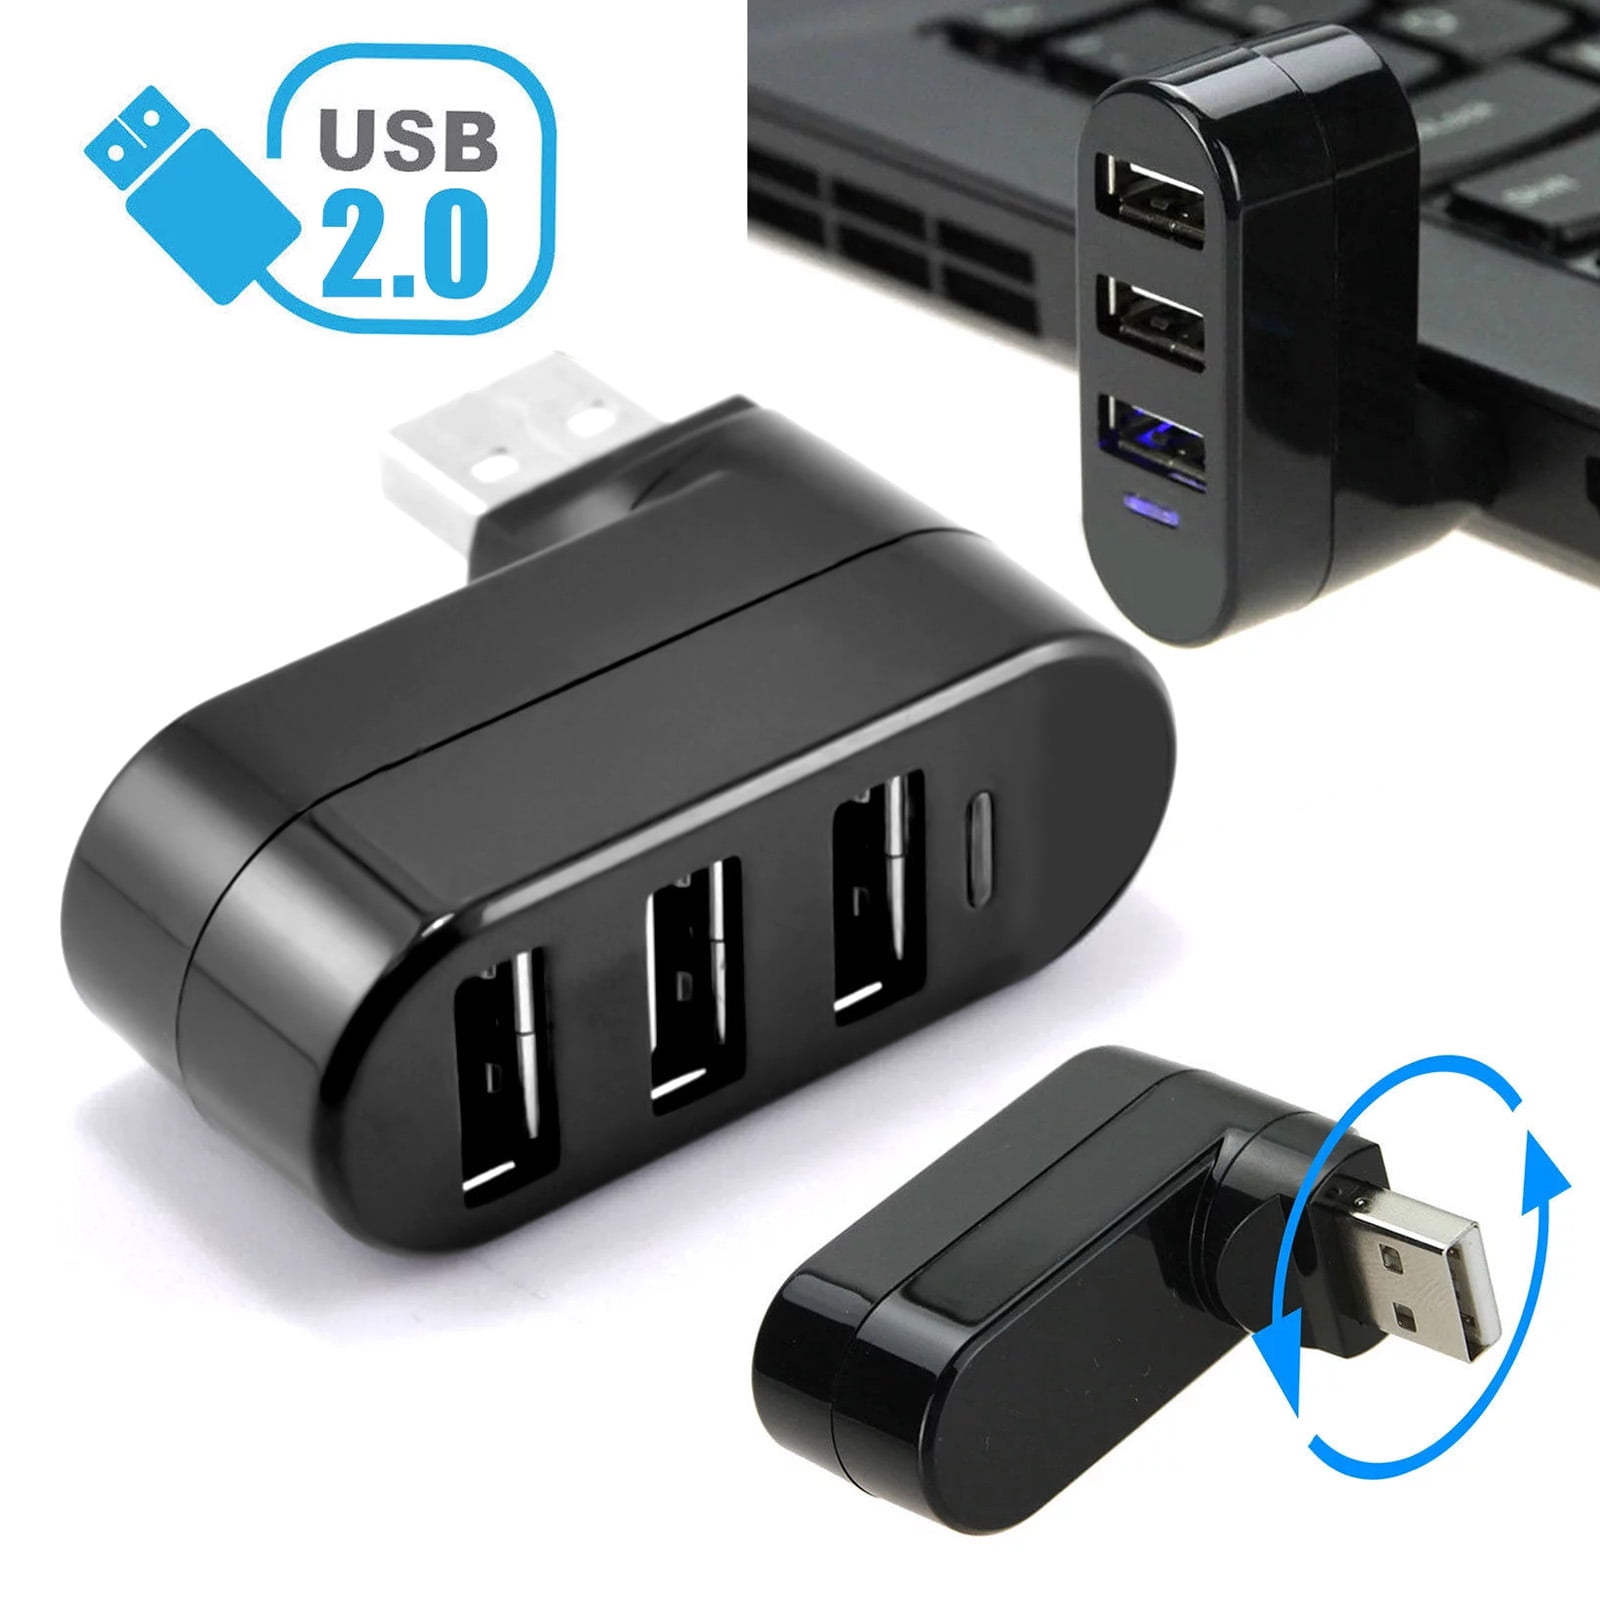 Linkstyle 5 Port USB HUB for PS4 Pro Only, USB 3.0/2.0 High Speed Charger  Controller Splitter Expander for Playstation 4 Pro